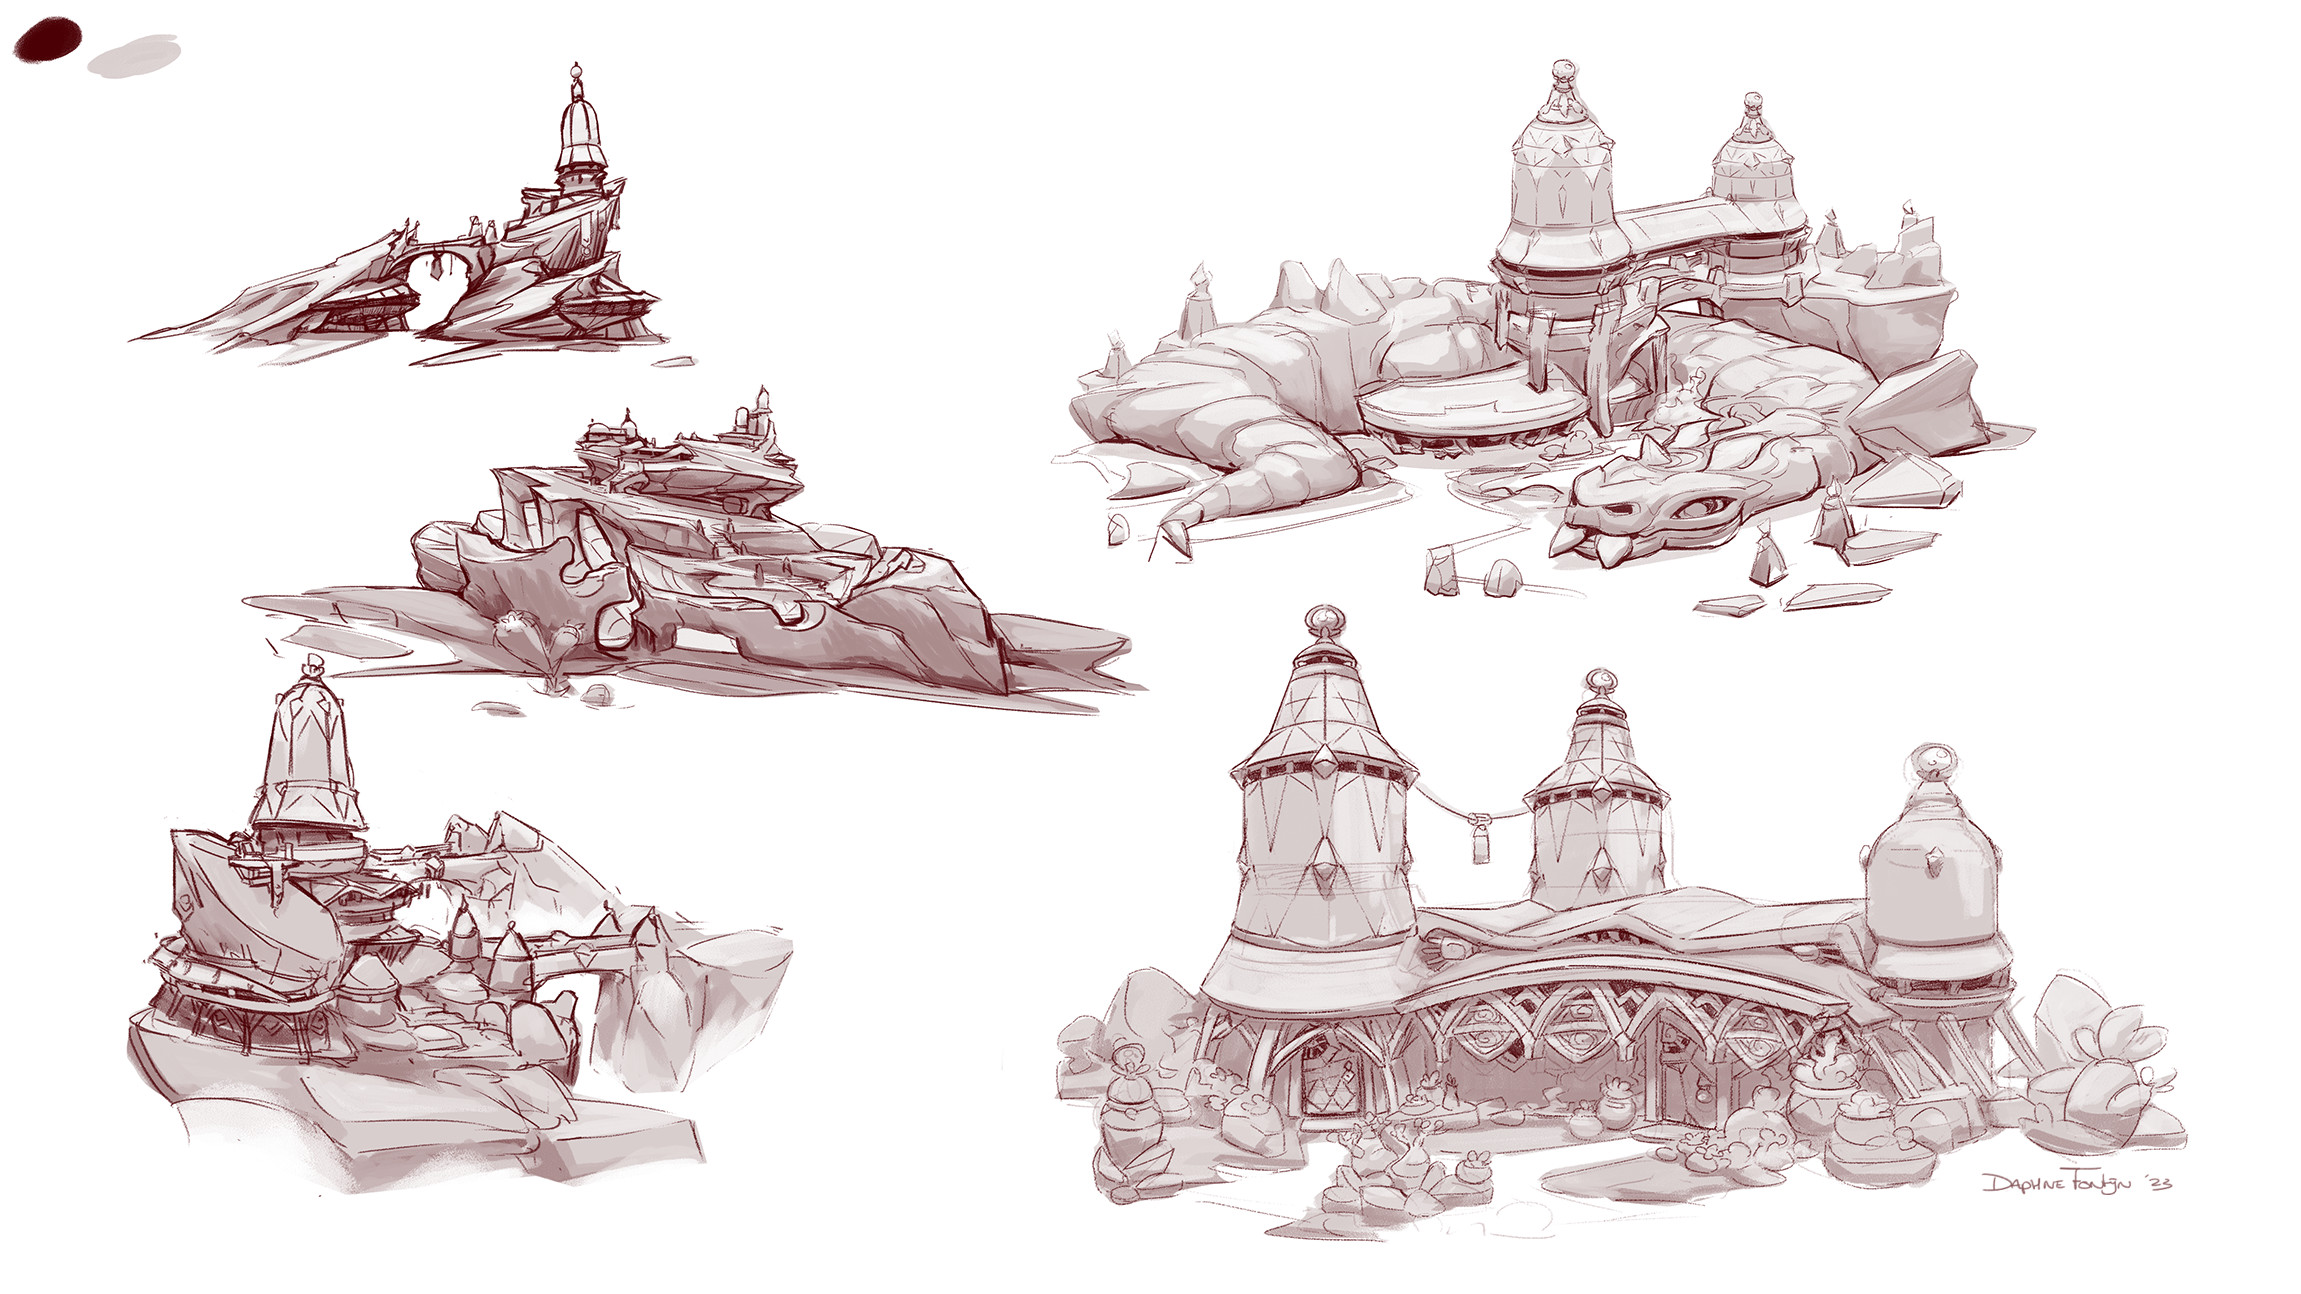 Desert architecture explorations. I wanted tall bell like structures with small windows so things can stay cooler inside, also lots of awnings for shade. 